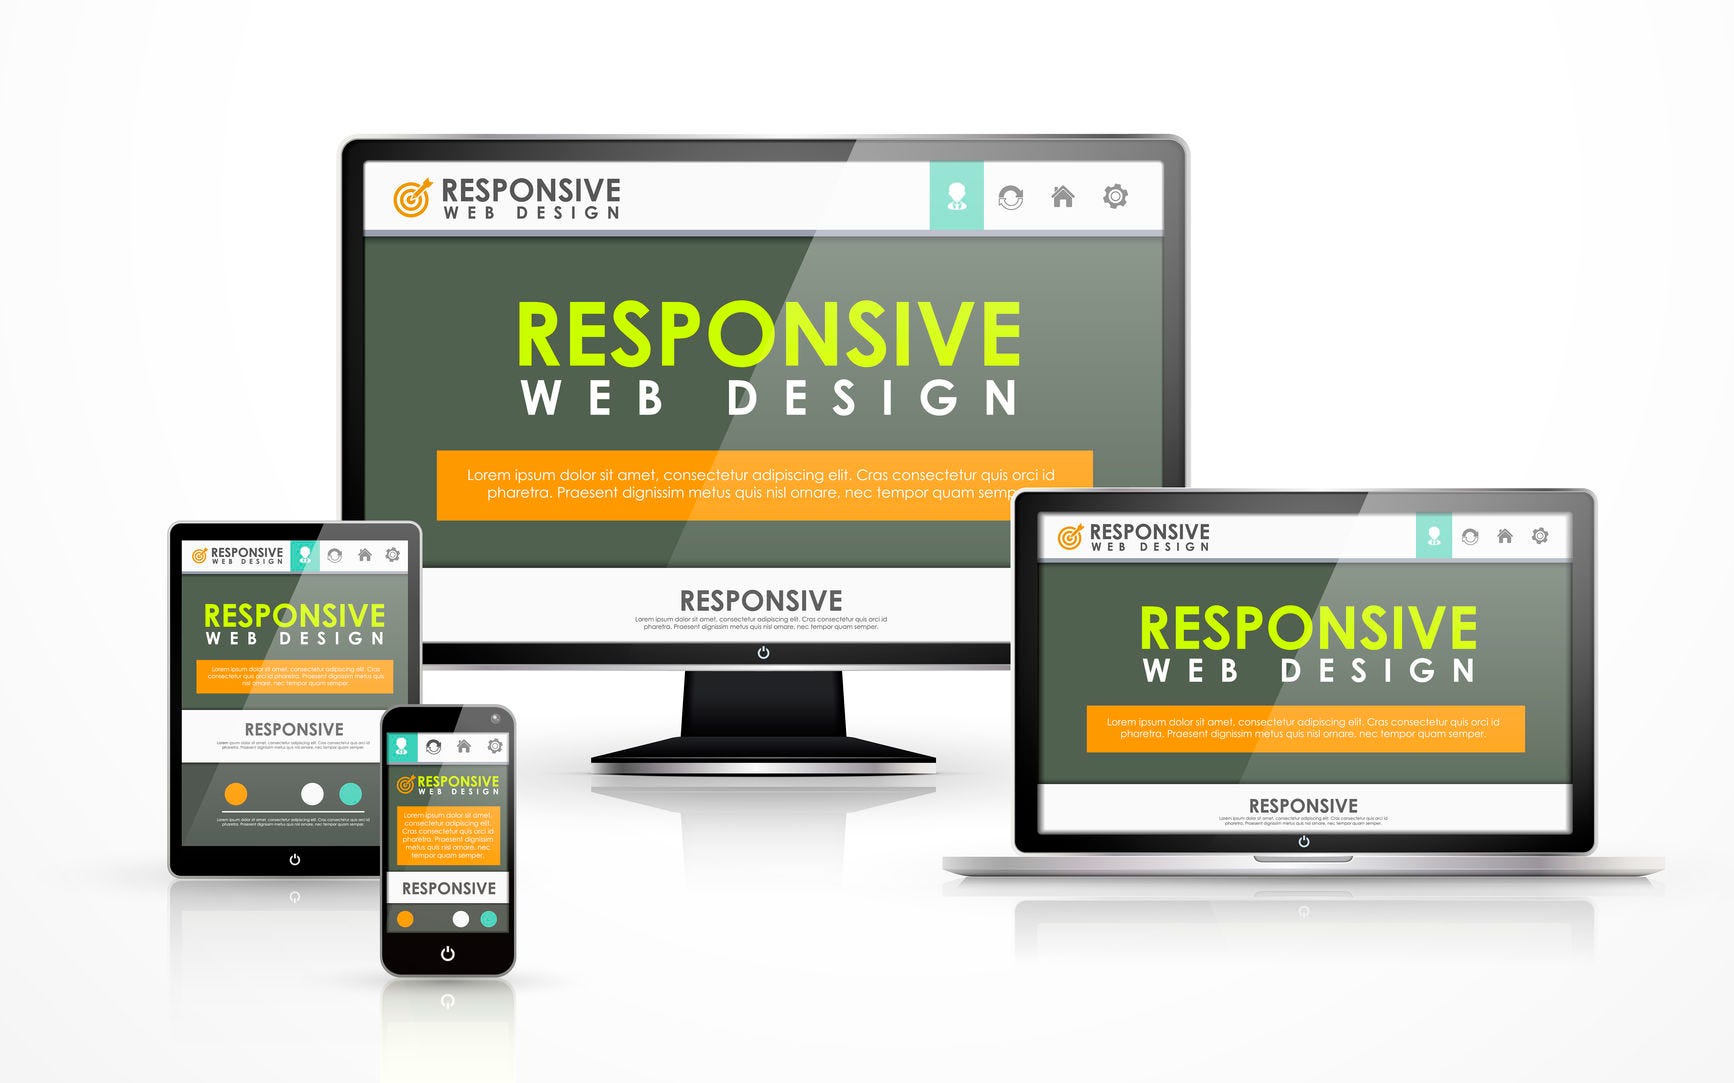 Content Strategy for responsive web design